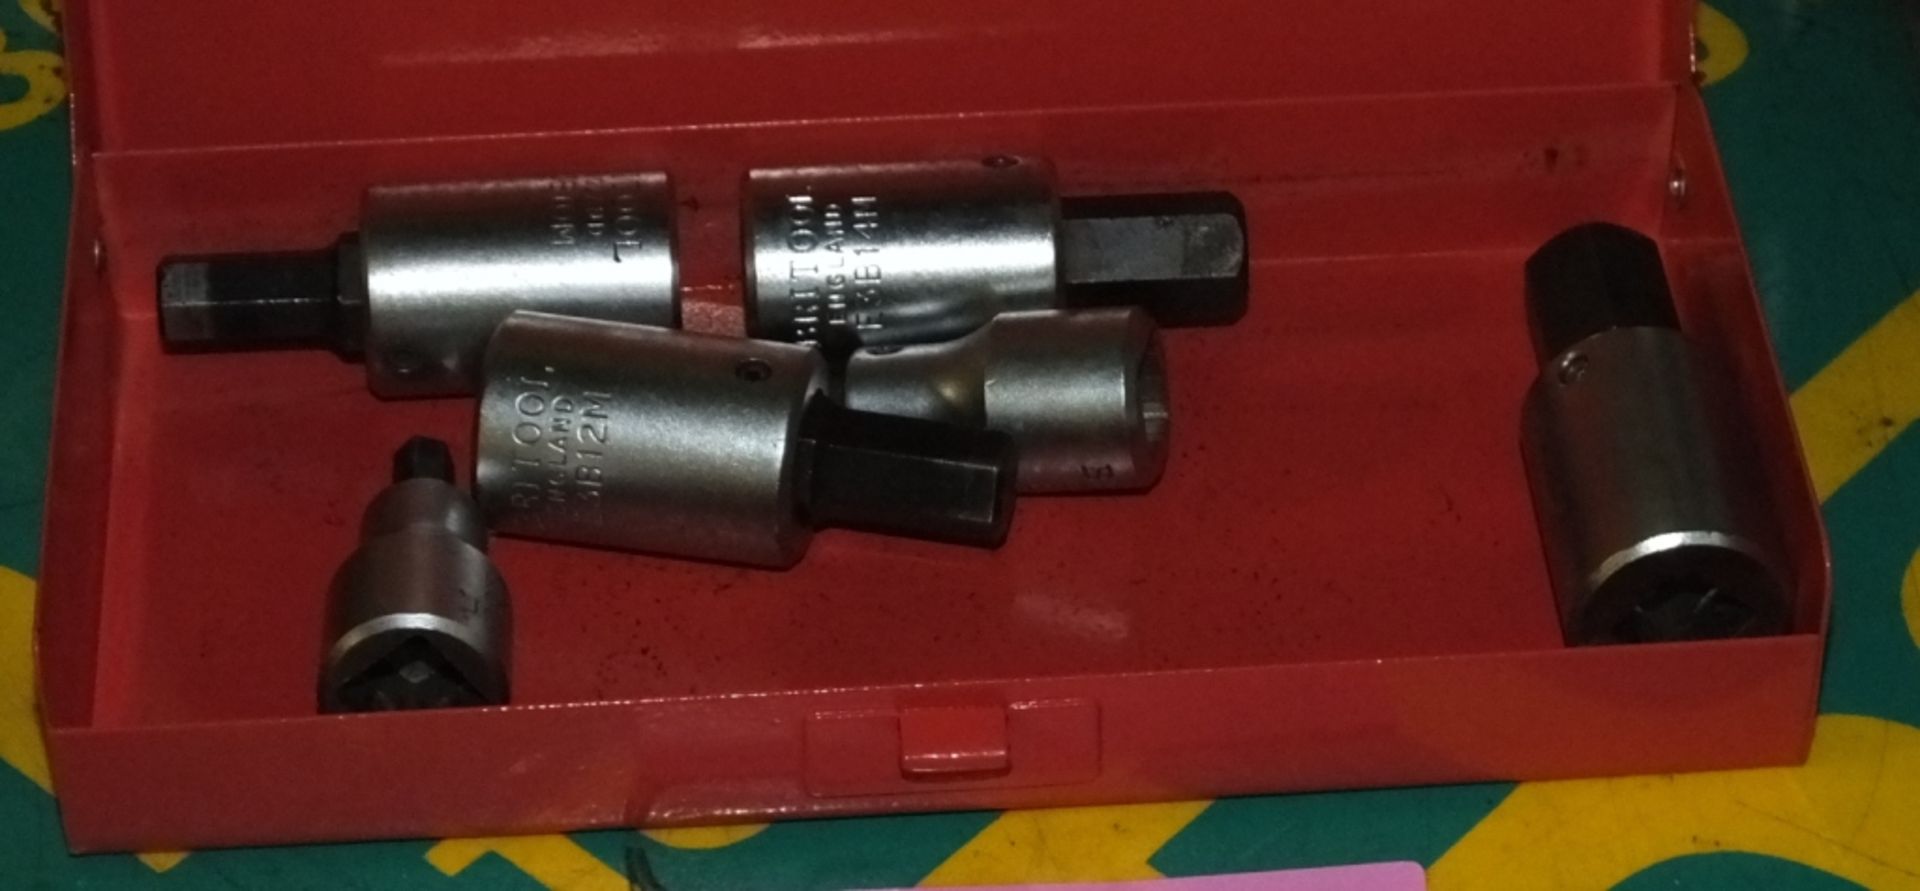 6 piece socket set in carry box